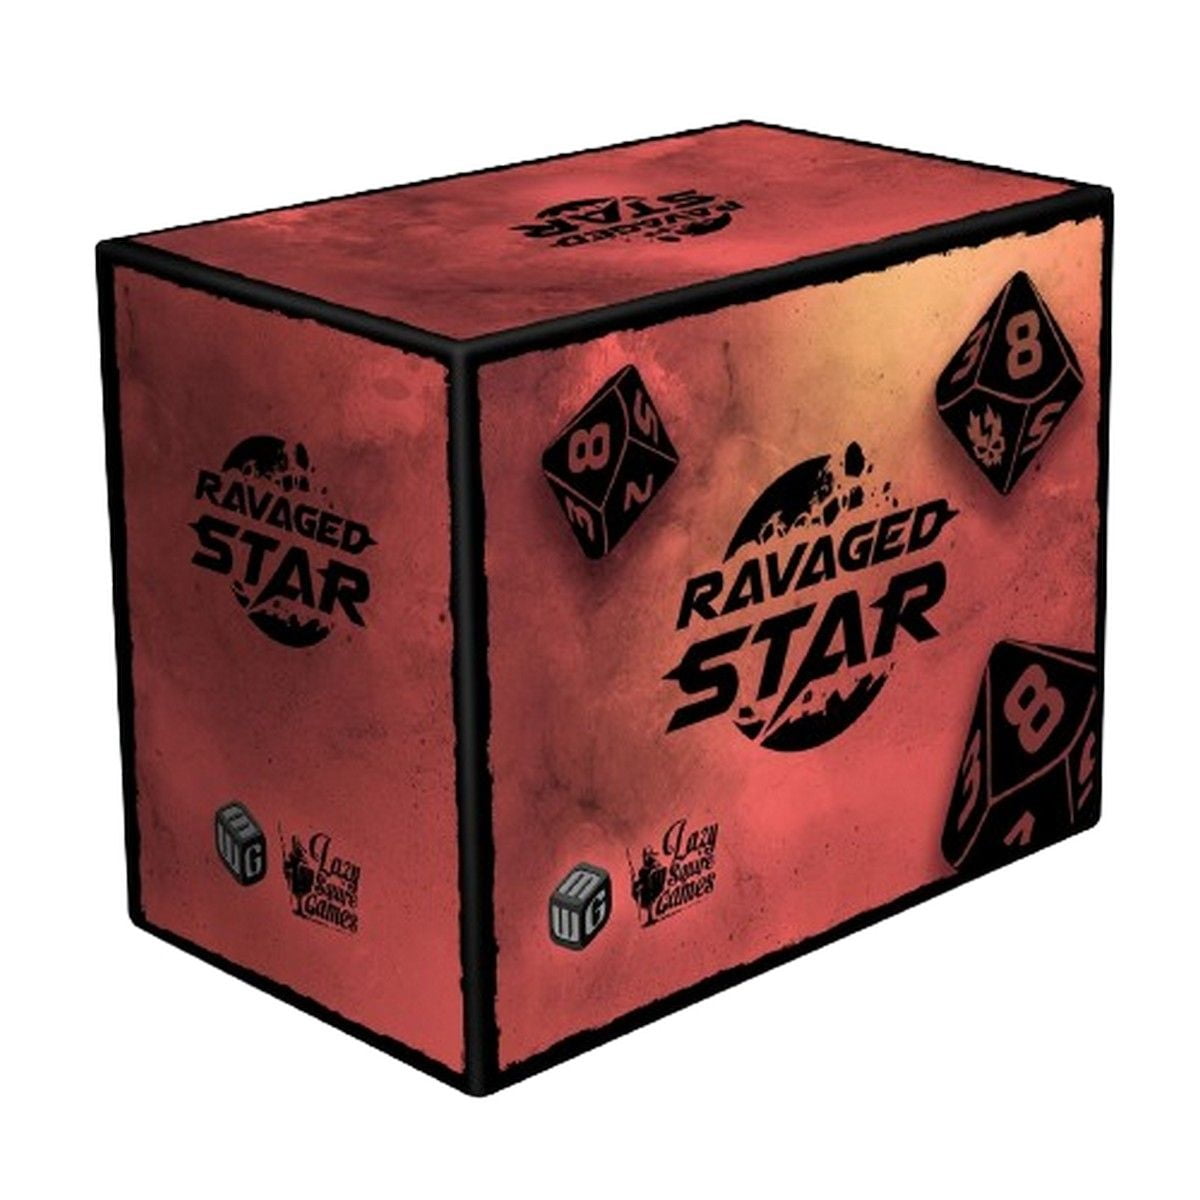 Ravaged Star: Veil-Touched - Dice Pack